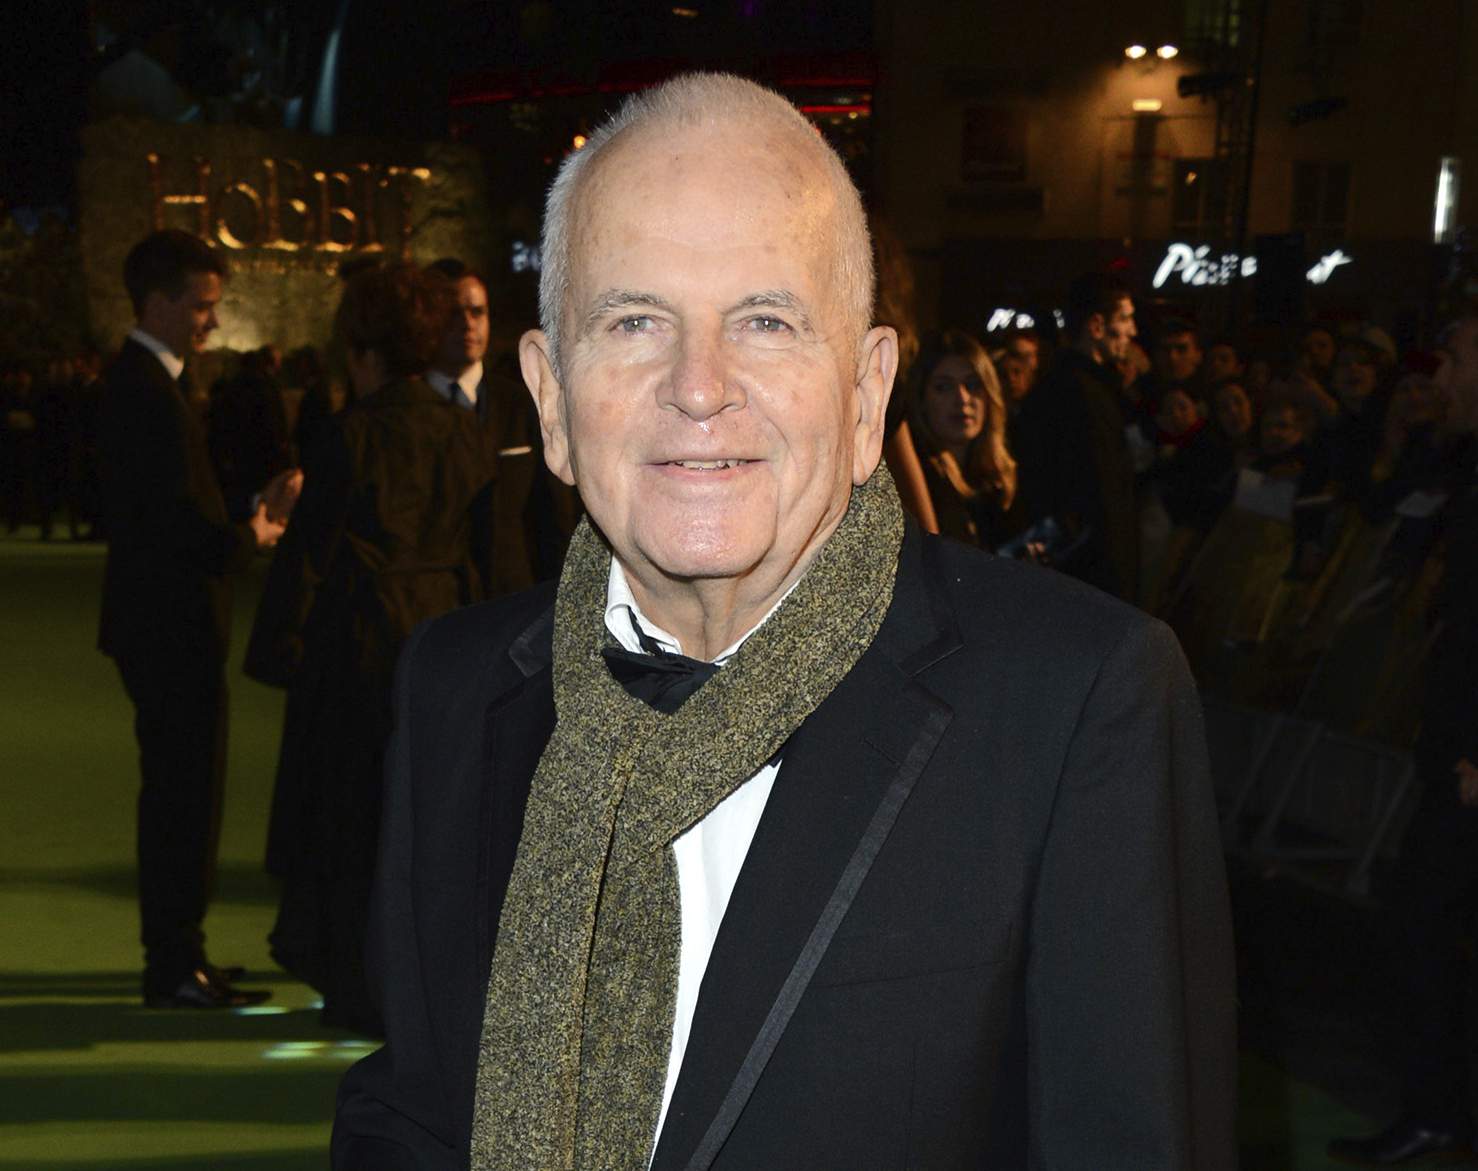 'Chariots of Fire,' 'Lord of the Rings' actor Ian Holm dies